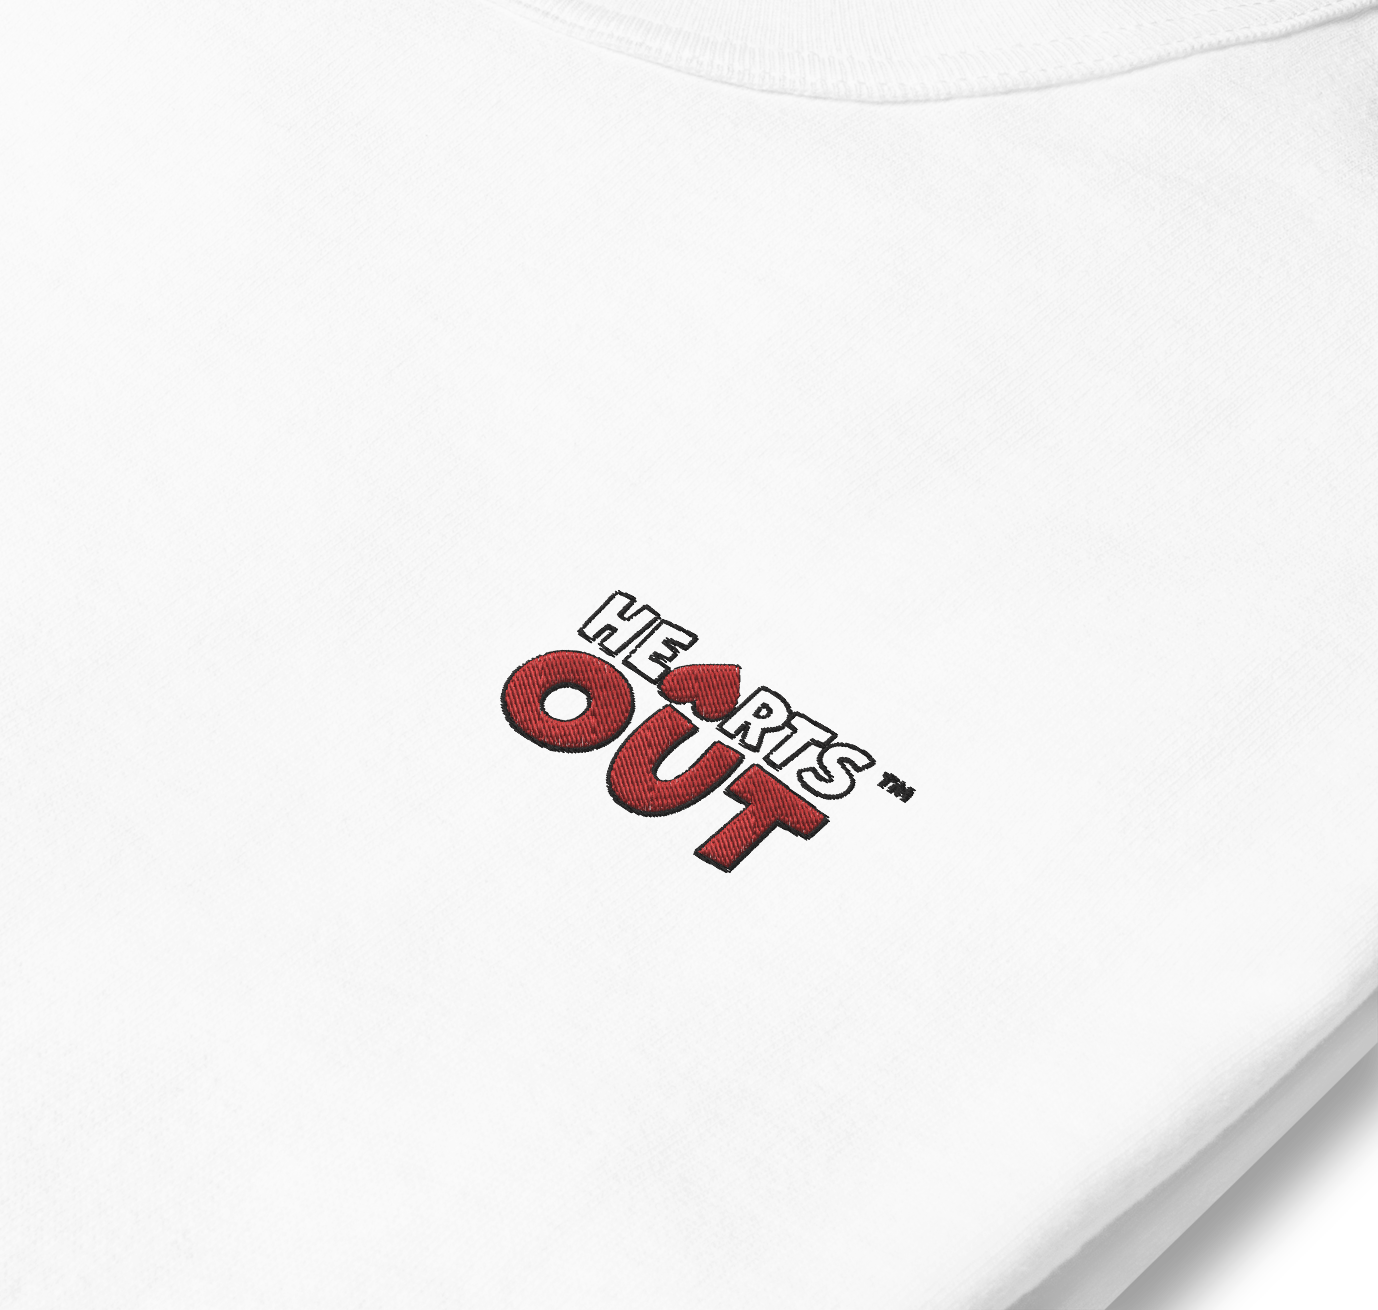 HEARTS OUT Embroidered Unisex Premium Tee